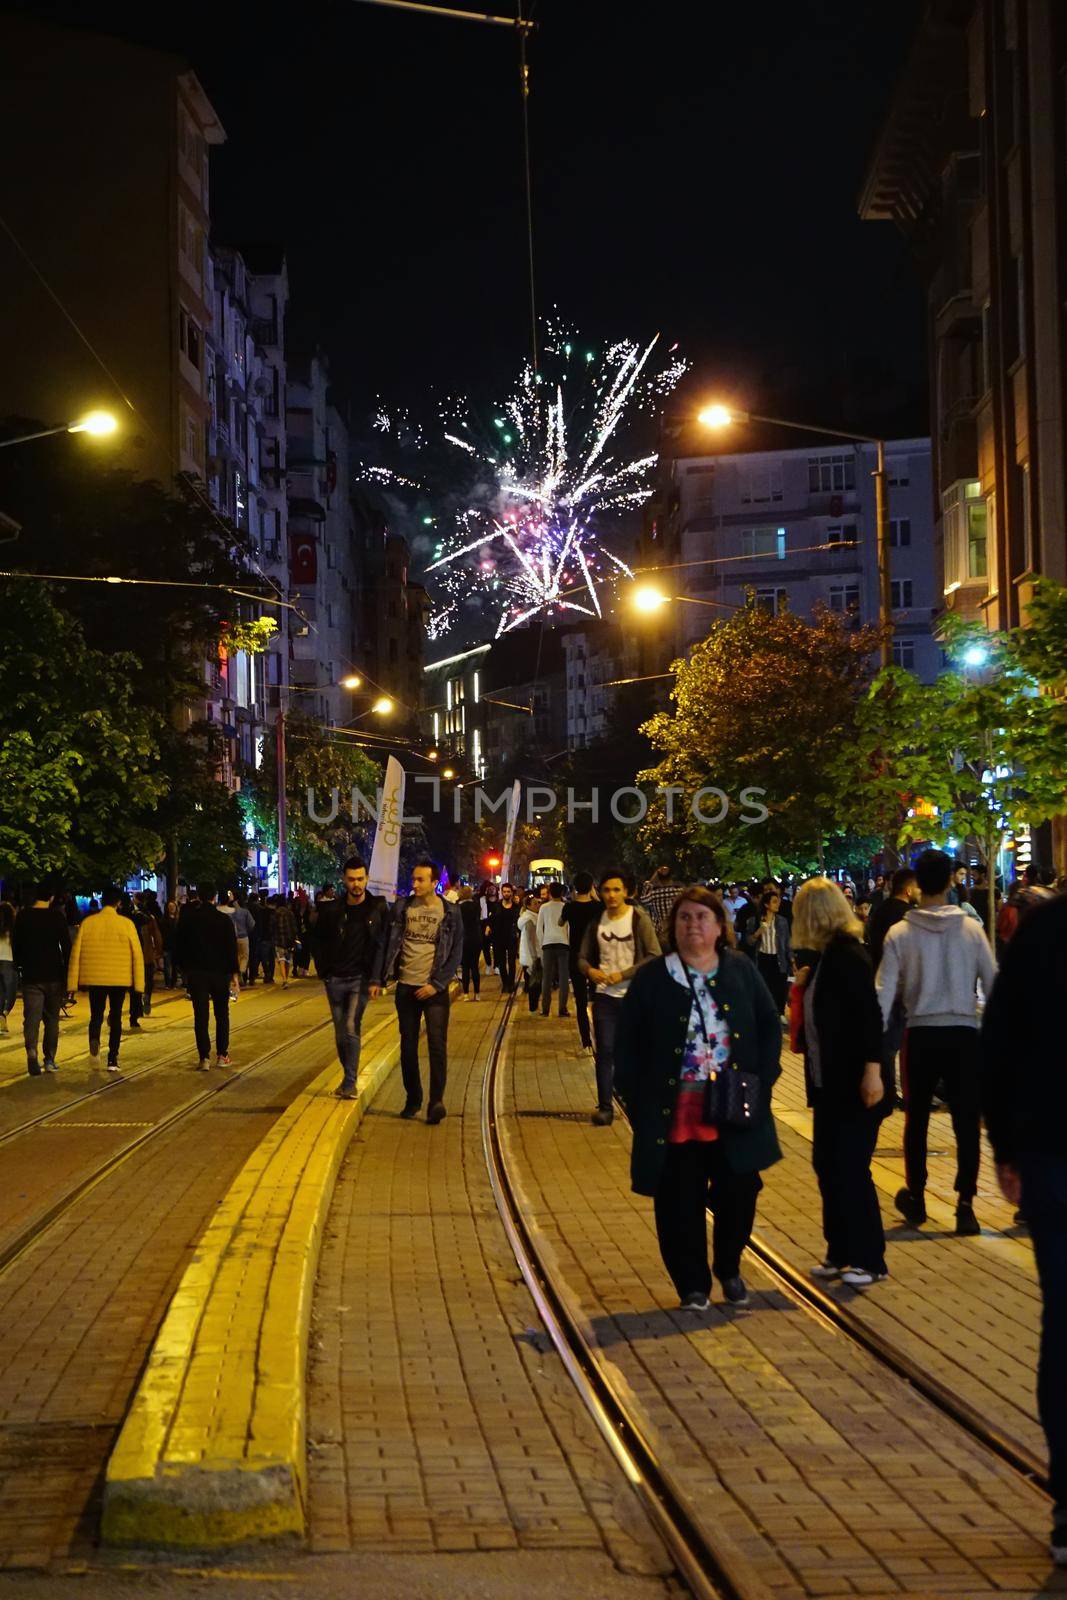 19 May 2019 Eskisehir, Turkey. 19 May National independence and sovereignty day celebrations in Eskisehir by tasci